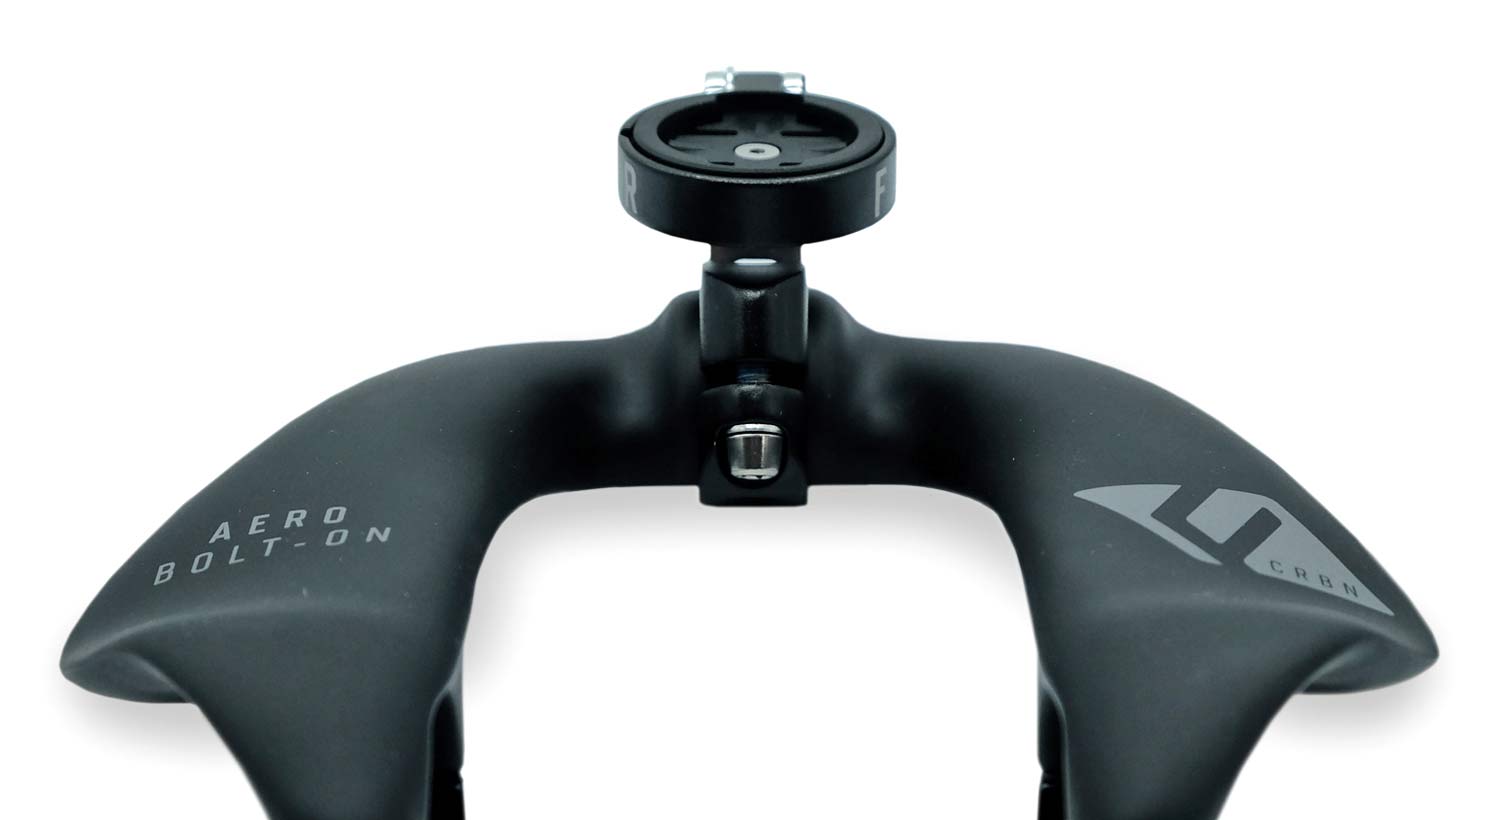 Farr out-front GPS Mount for Carbon Aero Bolt-On aero bar, centered